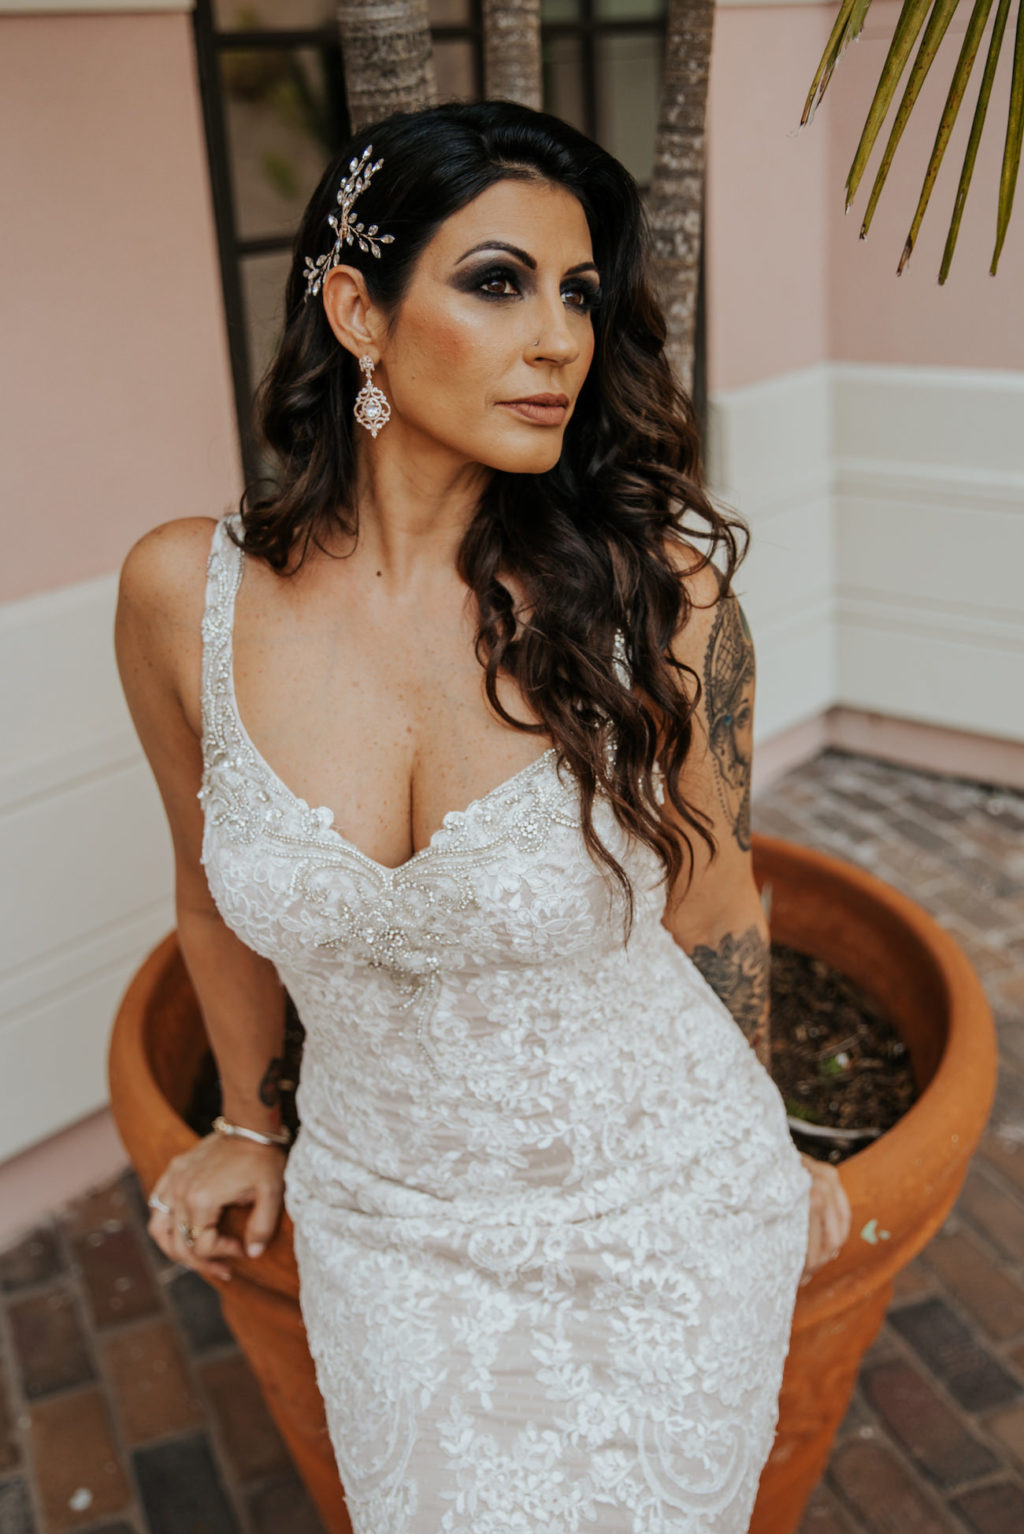 Outdoor Bridal Portrait | Bride Wearing Loose Curls and an Illusion Lace V Neck Sheath Bridal Gown Wedding Dress with Champagne Liner by Ashley and Justin Bride